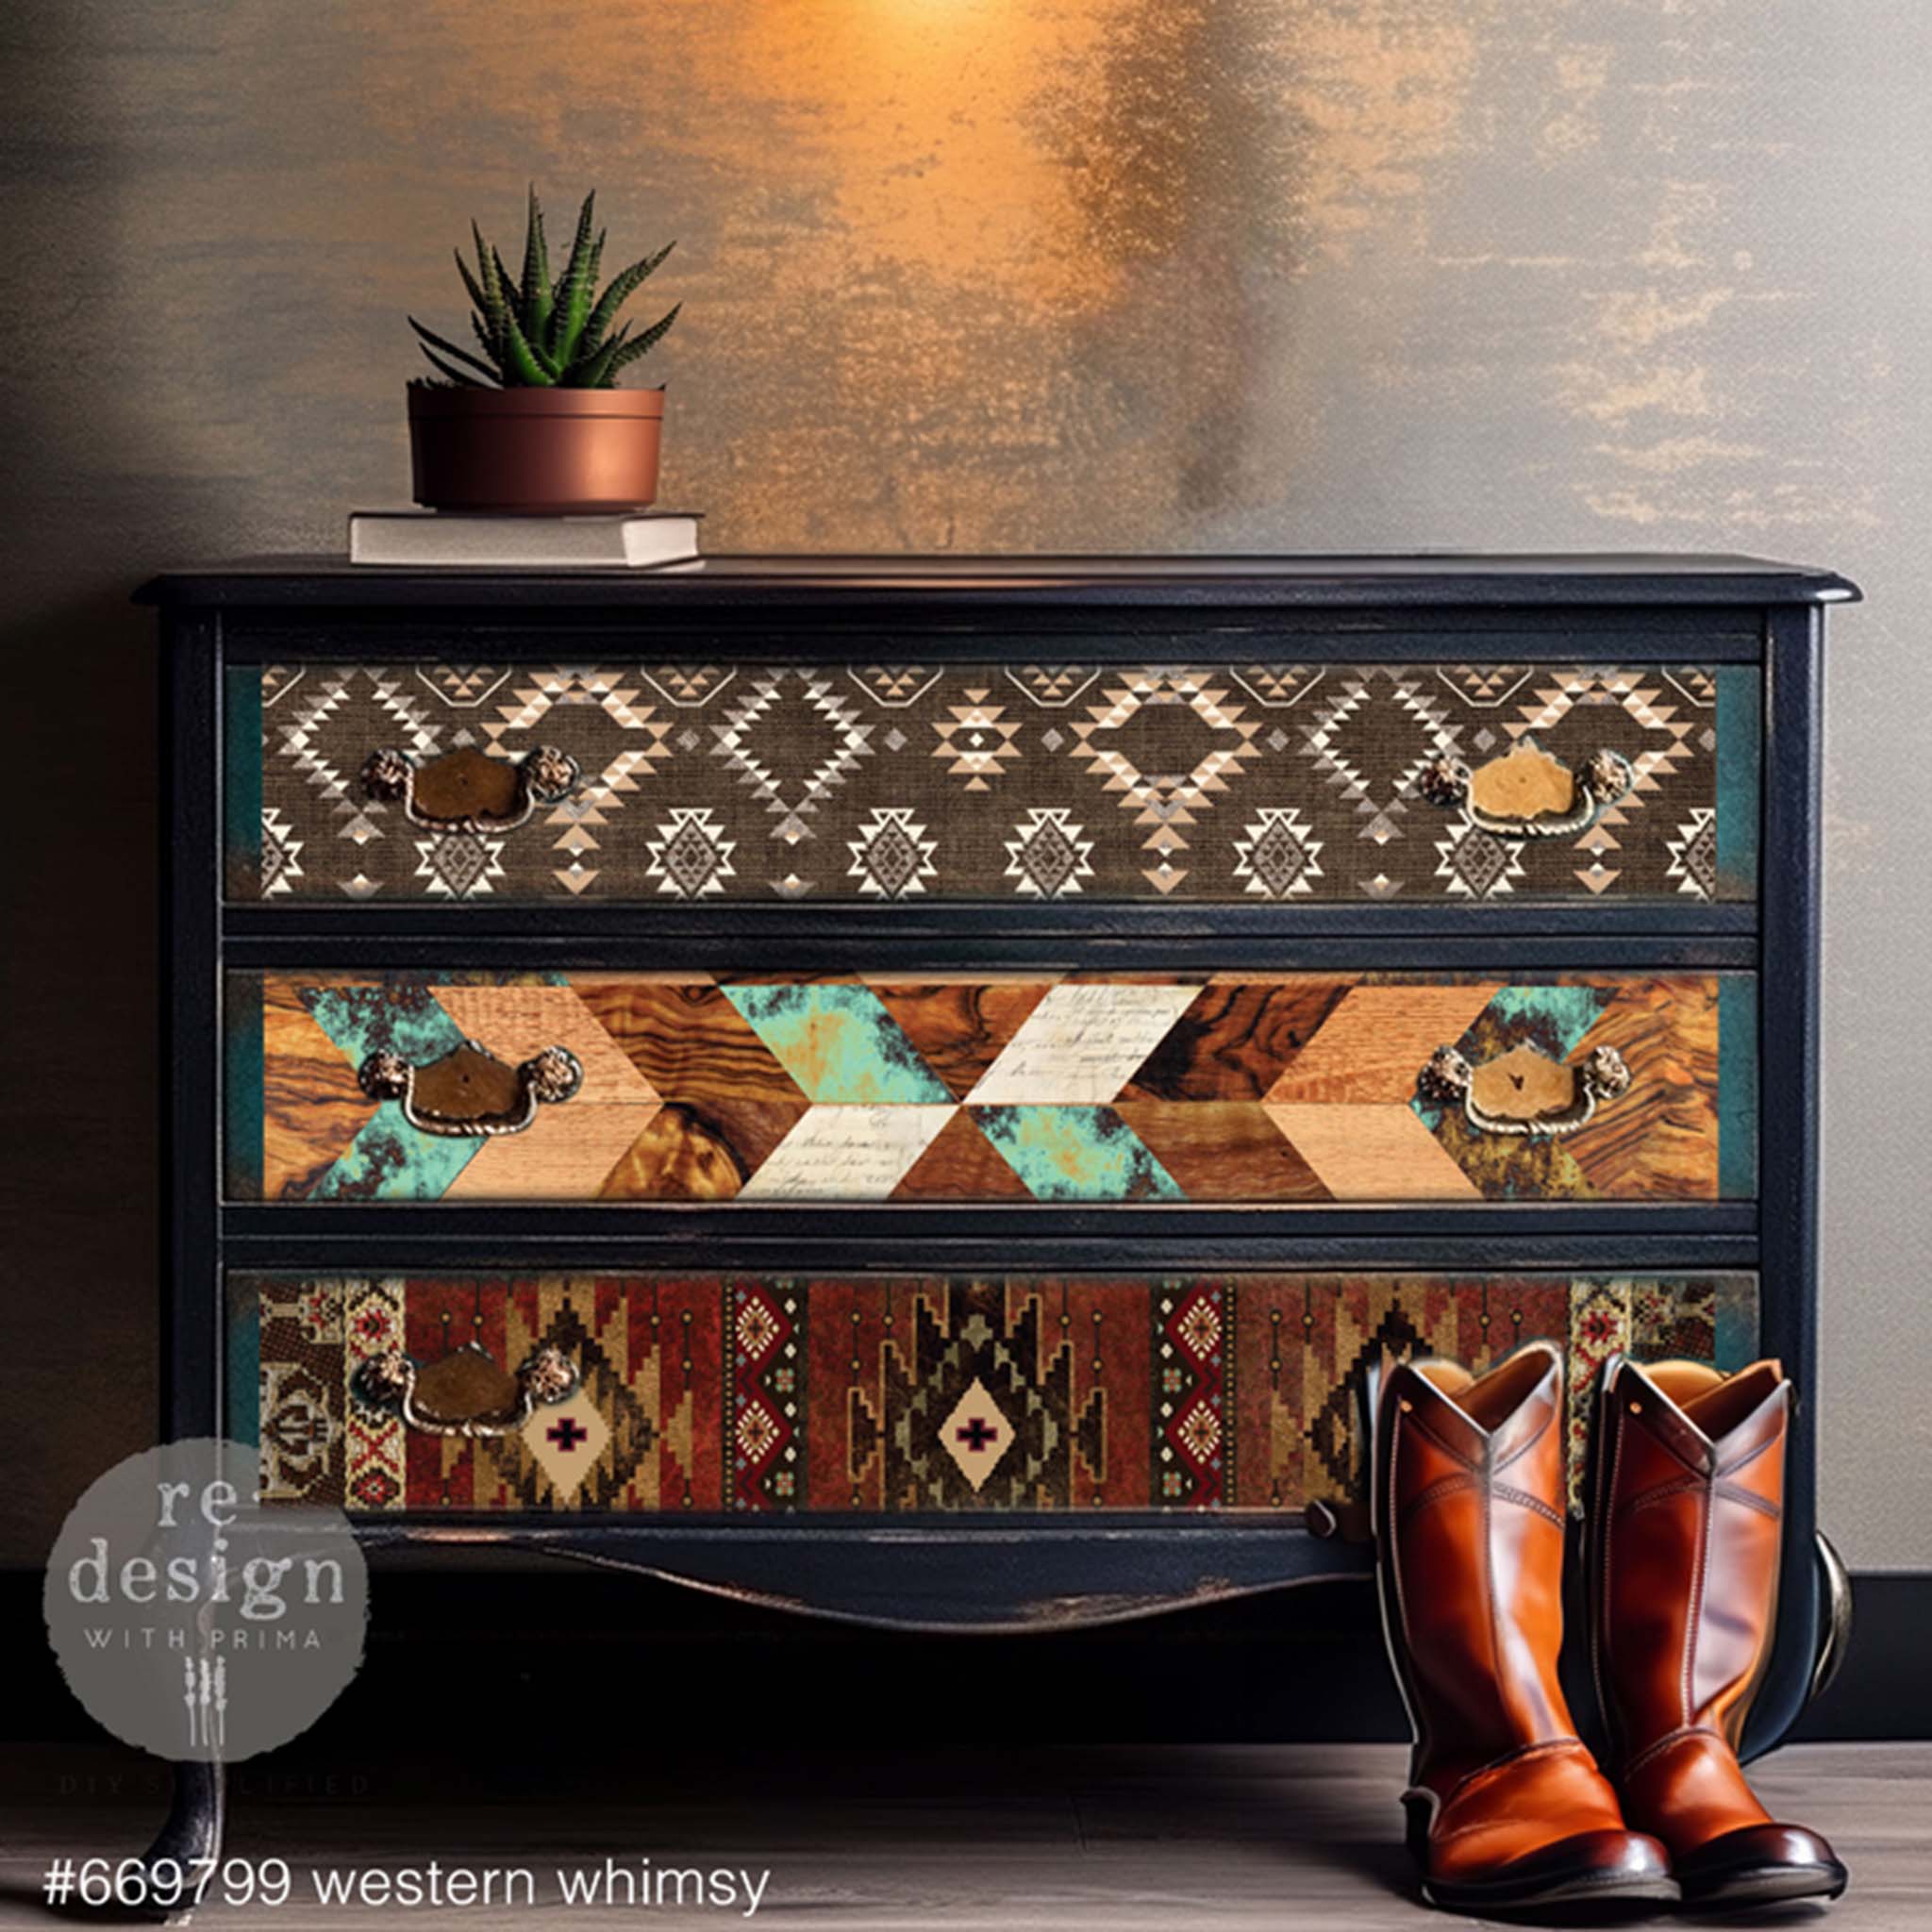 A vintage 3-drawer dresser is painted dark blue and features ReDesign with Prima's Western Whimsy tissue paper on the drawers.